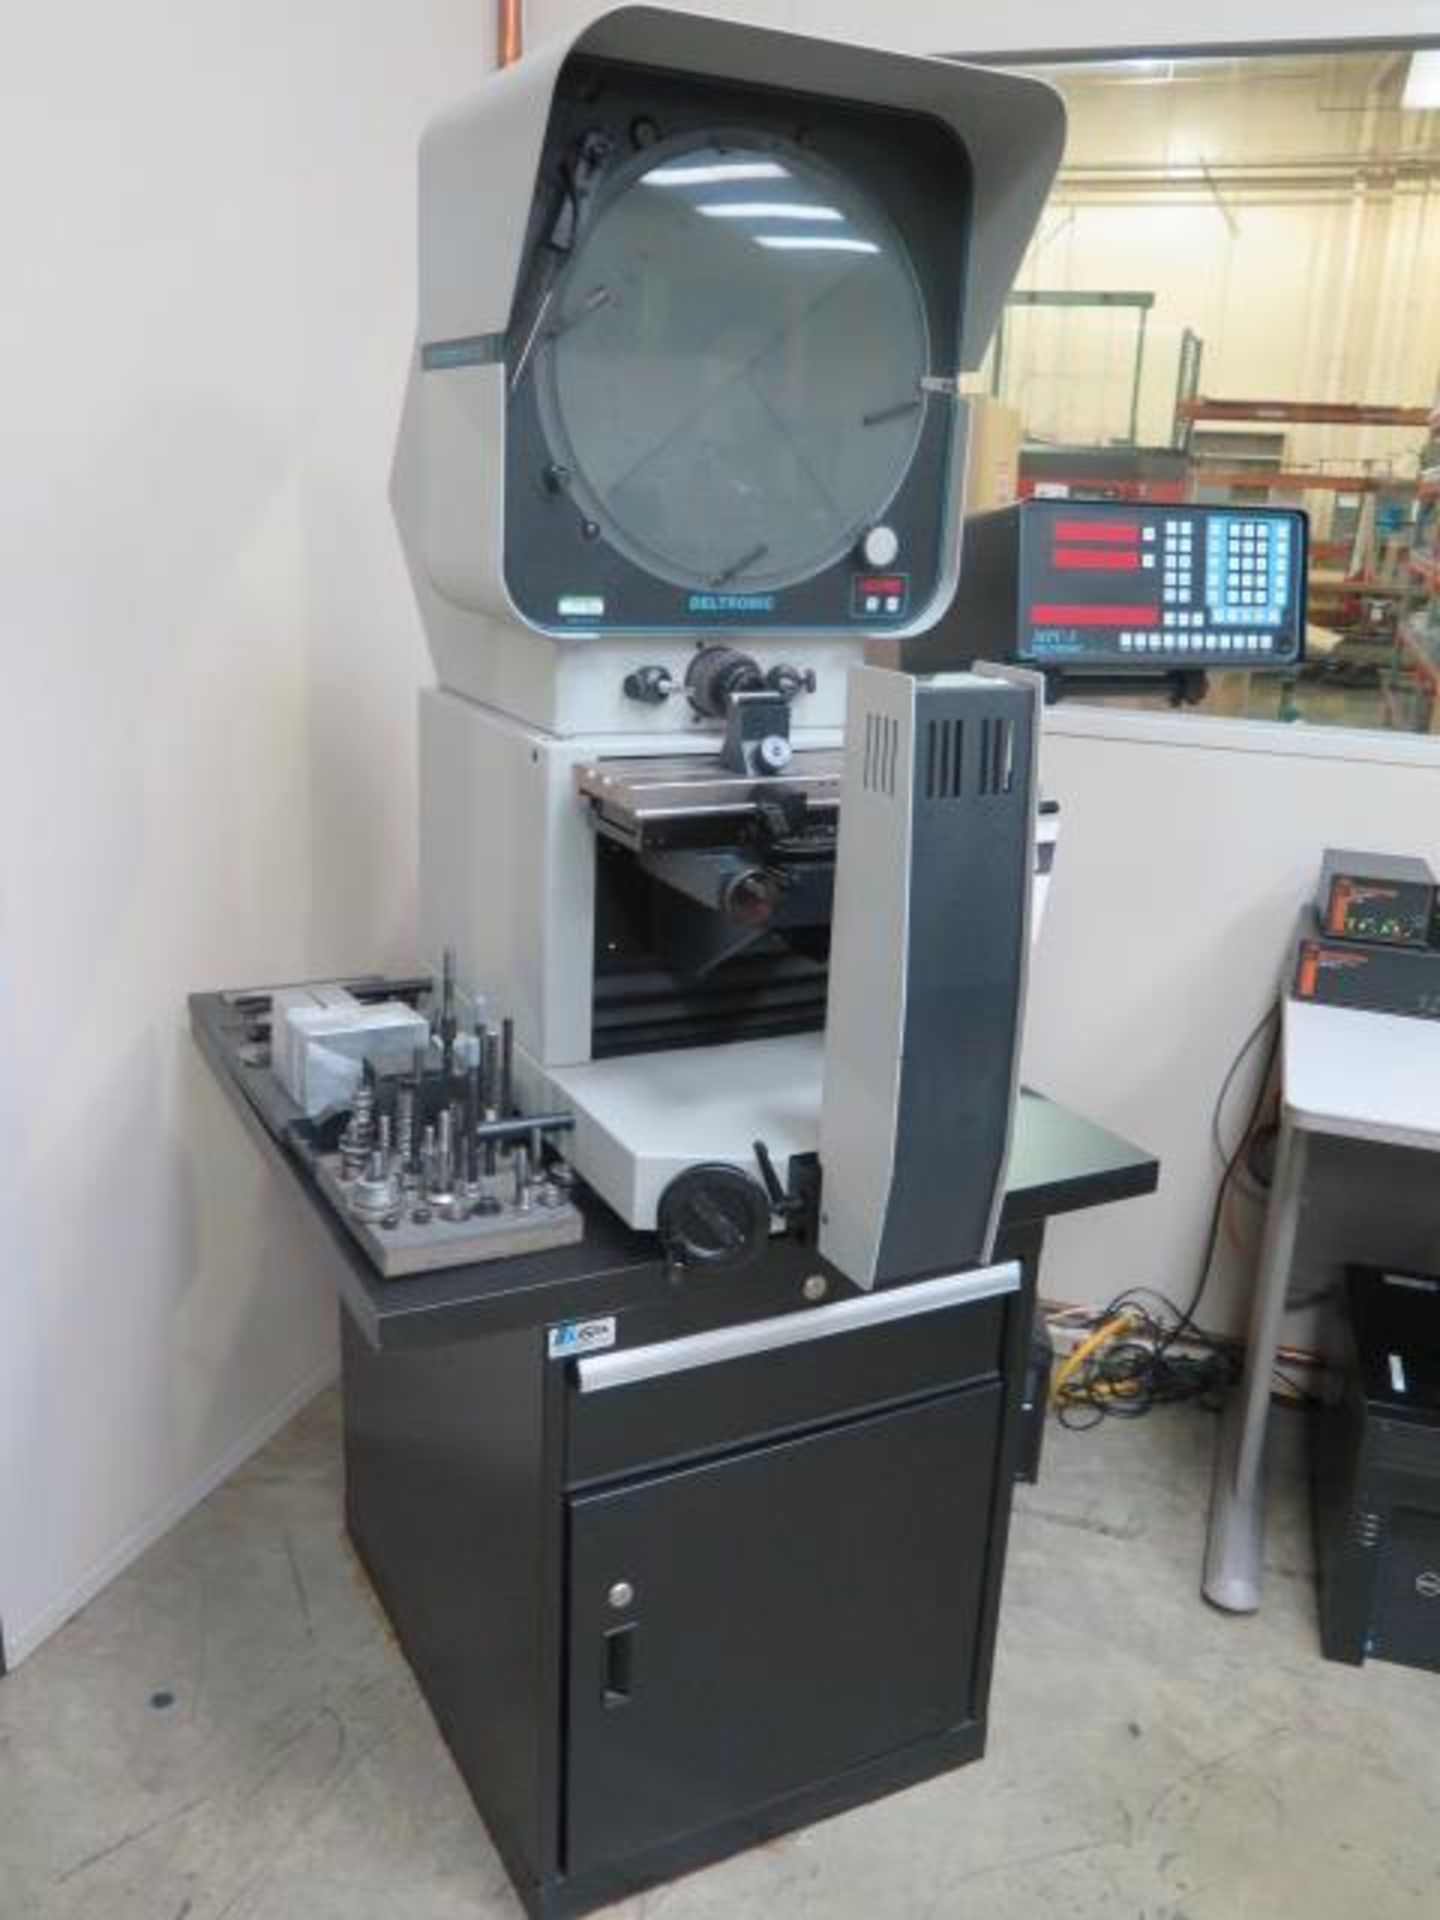 Deltronic DH216-MPC5 15” Optical Comparator s/n 389045807 w/ MPC-5 Programmable DRO, SOLD AS IS - Image 3 of 13